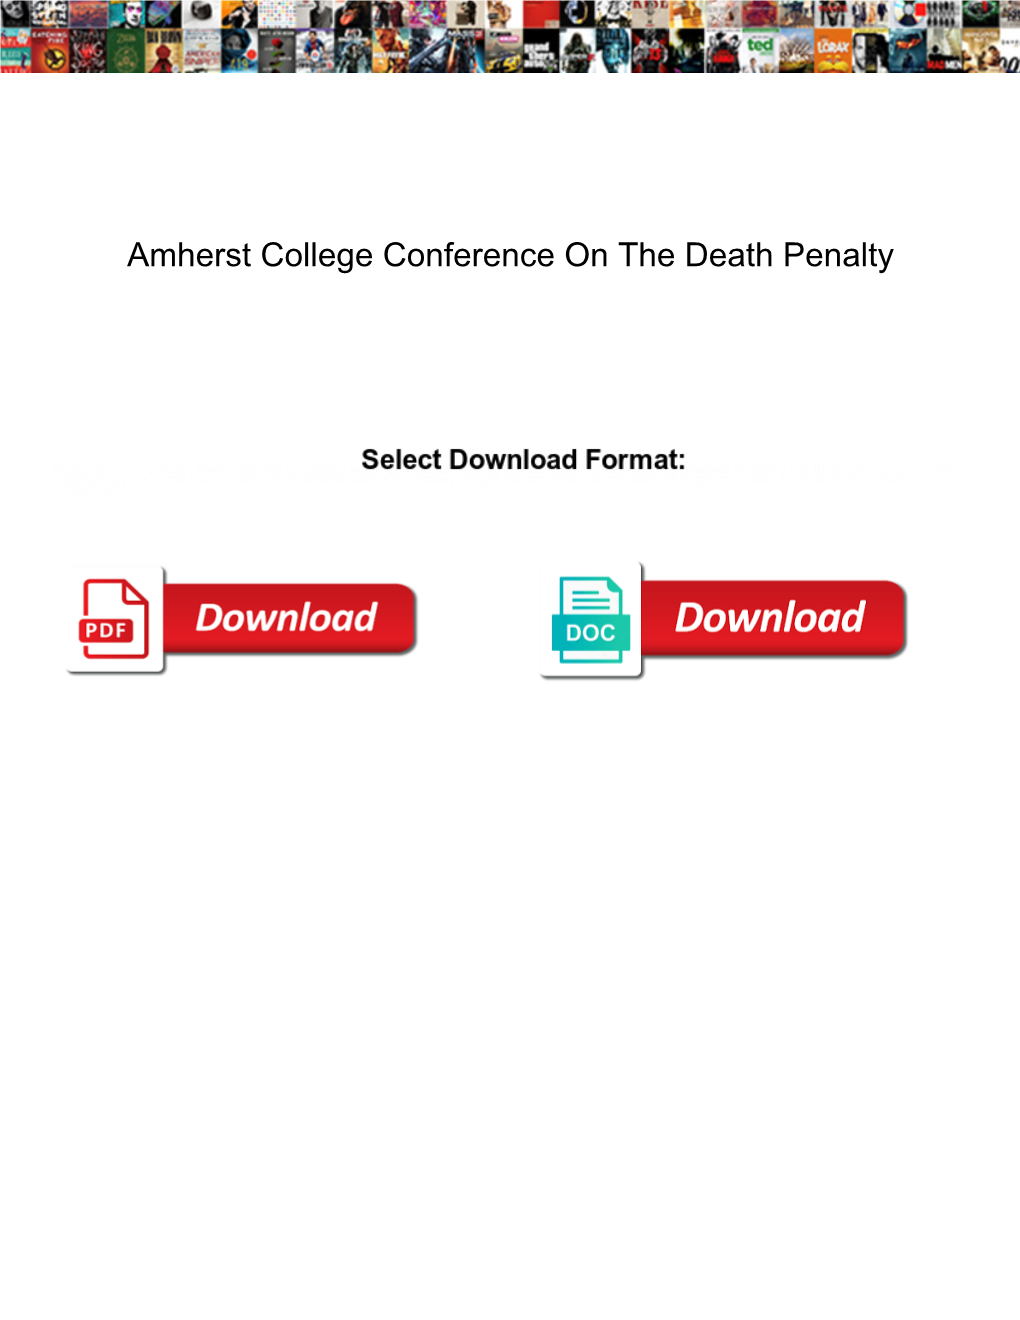 Amherst College Conference on the Death Penalty